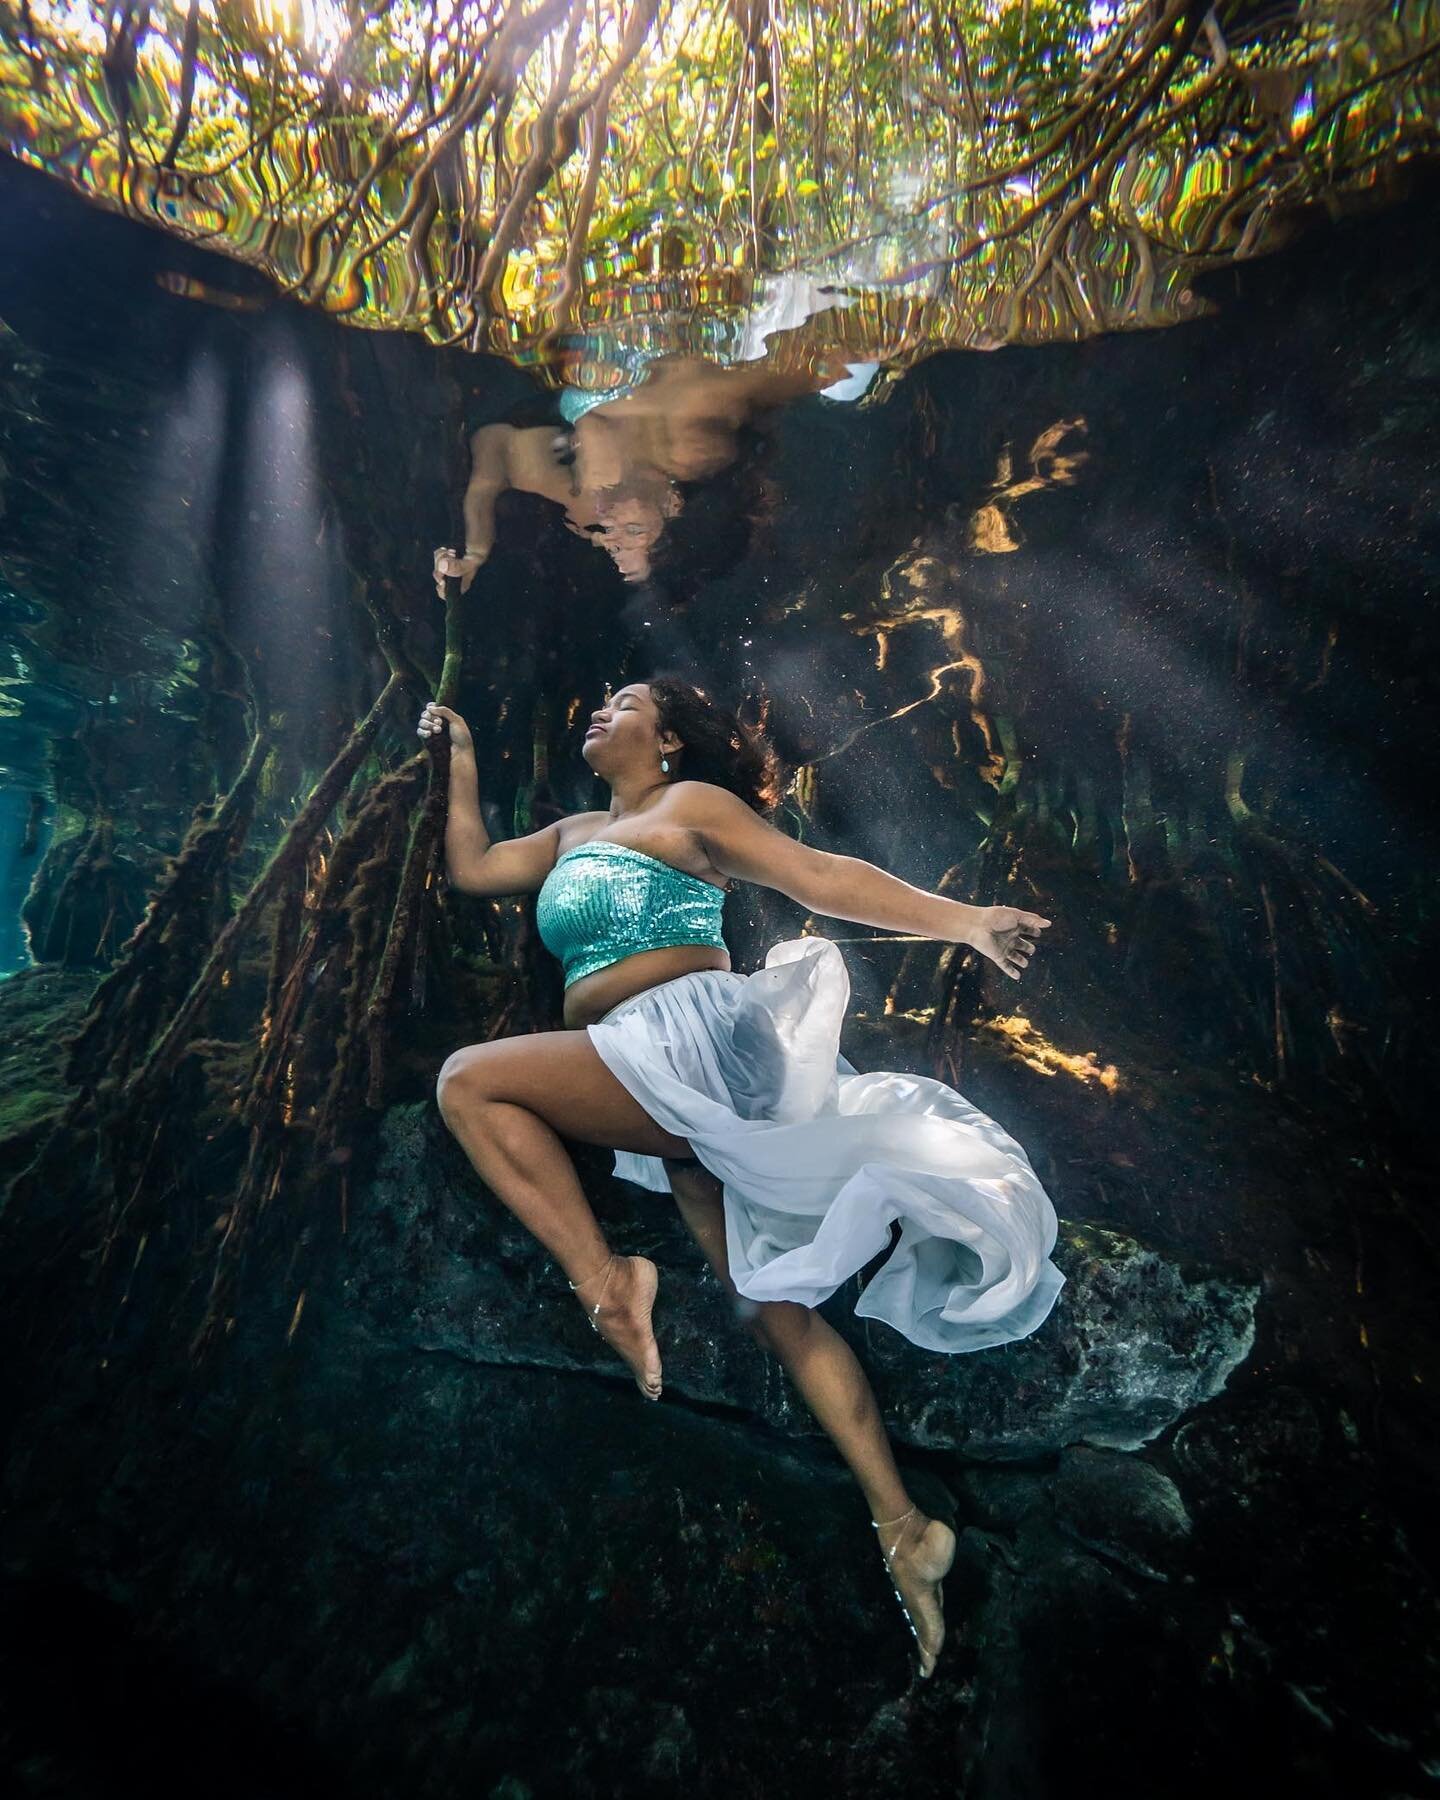 &quot;This world is but a canvas to our imagination&rdquo;⁠
-Henry David Thoreau⁠-⁠
⁠
Let your imagination run wild. ✨⁠
⁠
This wonderful day⁠ created some truly beautiful photos. 🤍⁠

⁠
Check out my website to learn more about my underwater portraits